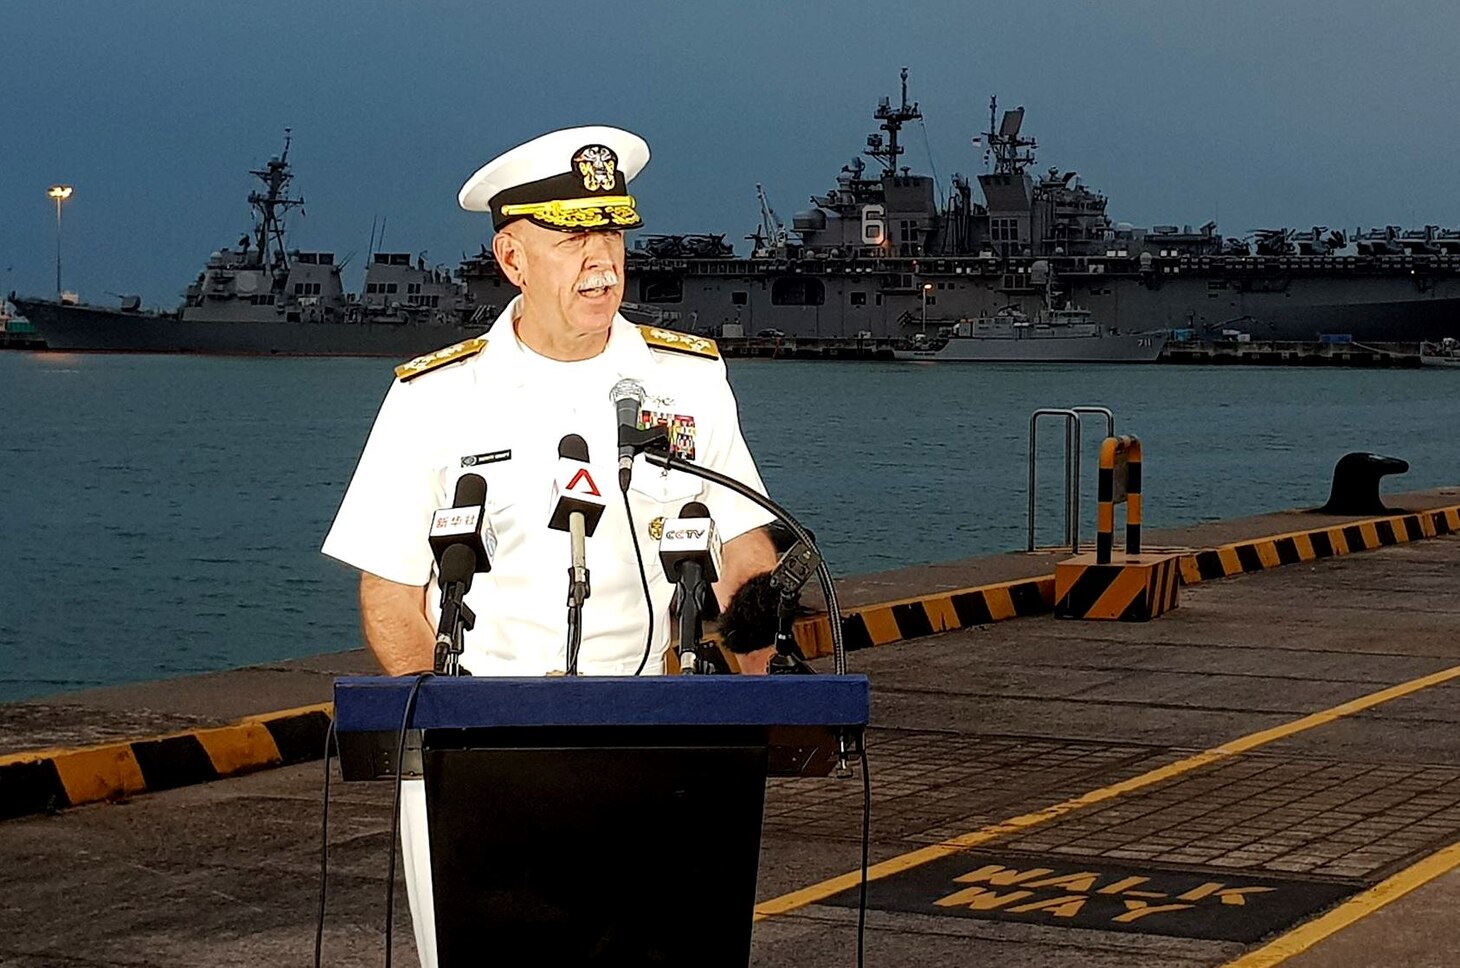 CHANGI NAVAL BASE, REPUBLIC OF SINGAPORE (Aug. 22, 2017) Pacific Fleet Commander Admiral Scott Swift updates reporters on the situation aboard USS John S. McCain (DDG 56).